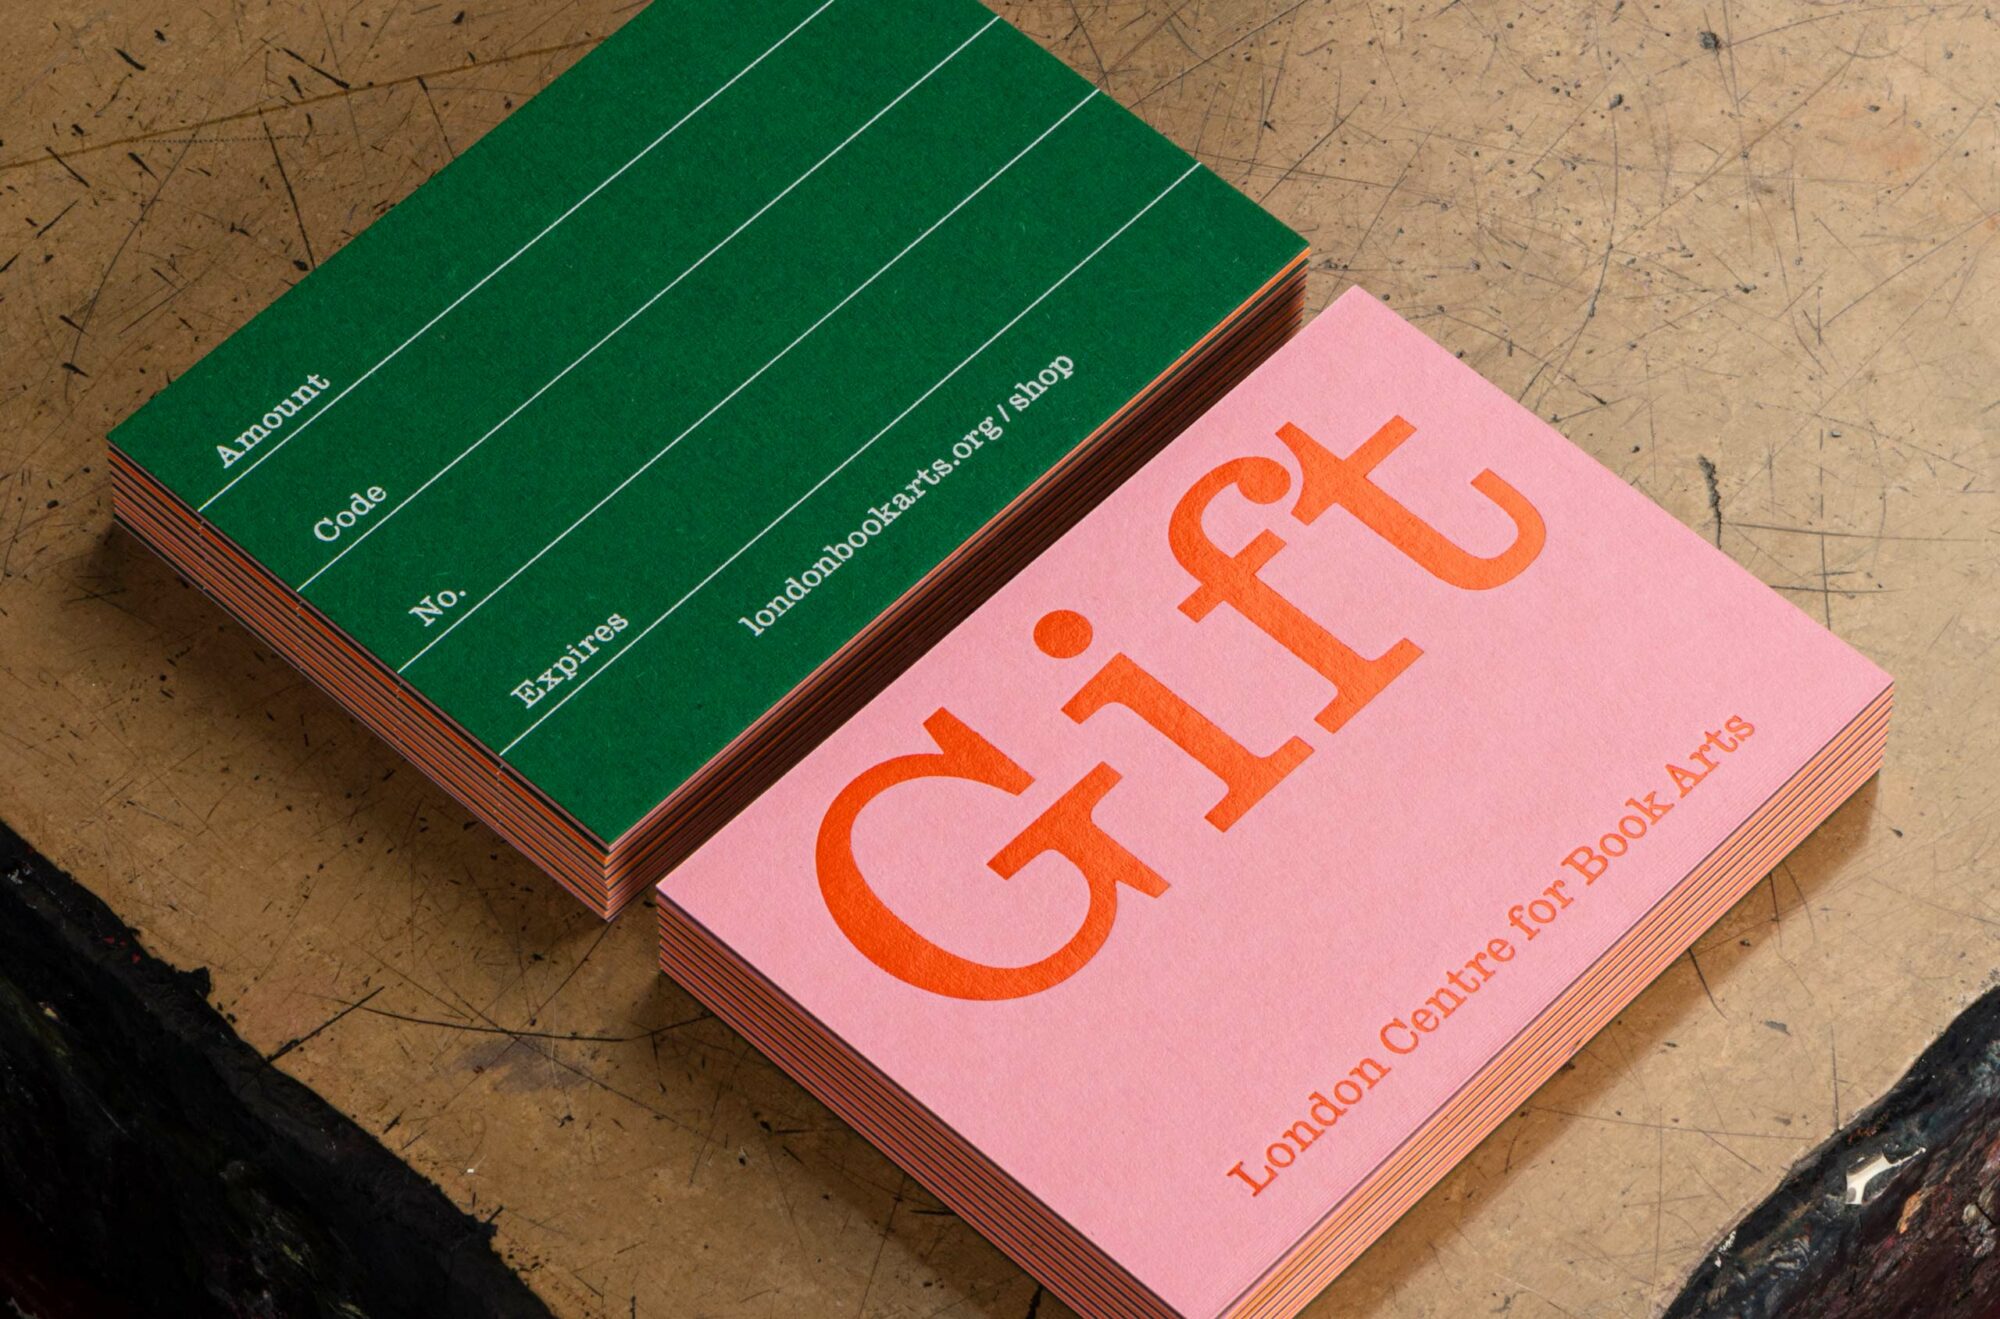 Green and pink duplex and block foiled gift card design for the London Centre for Book Arts designed by Studio Bergini